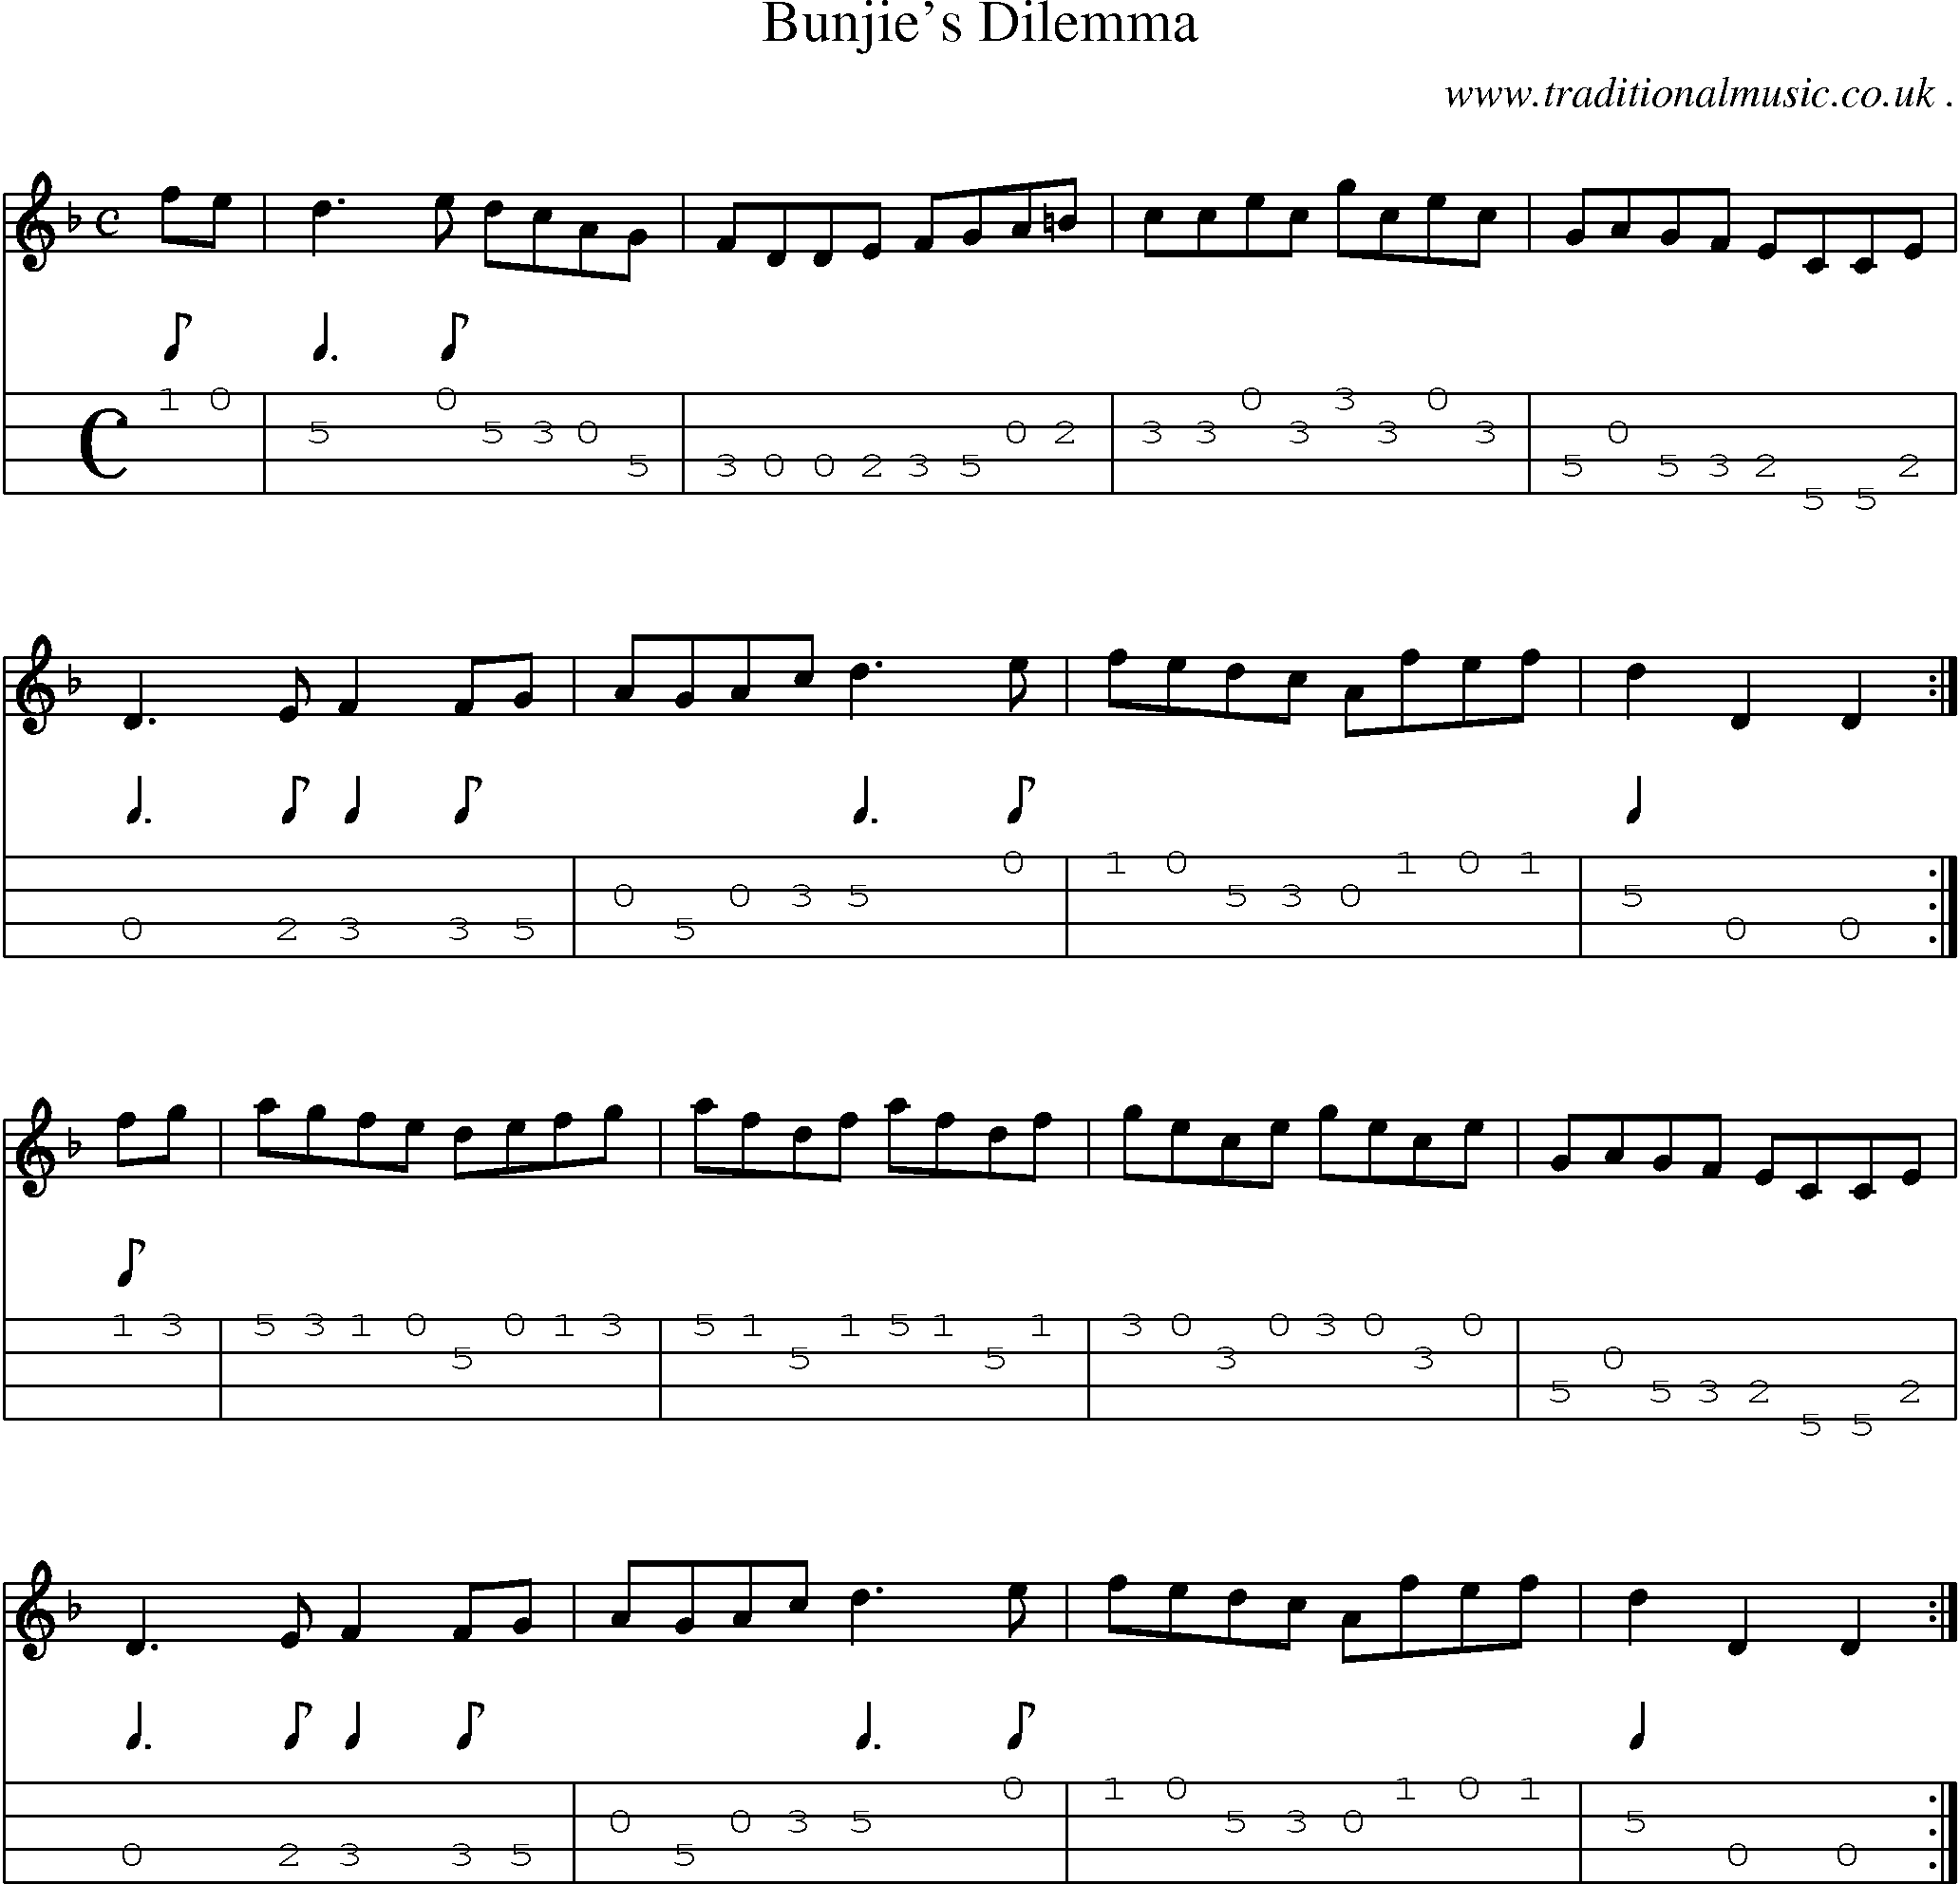 Sheet-music  score, Chords and Mandolin Tabs for Bunjies Dilemma